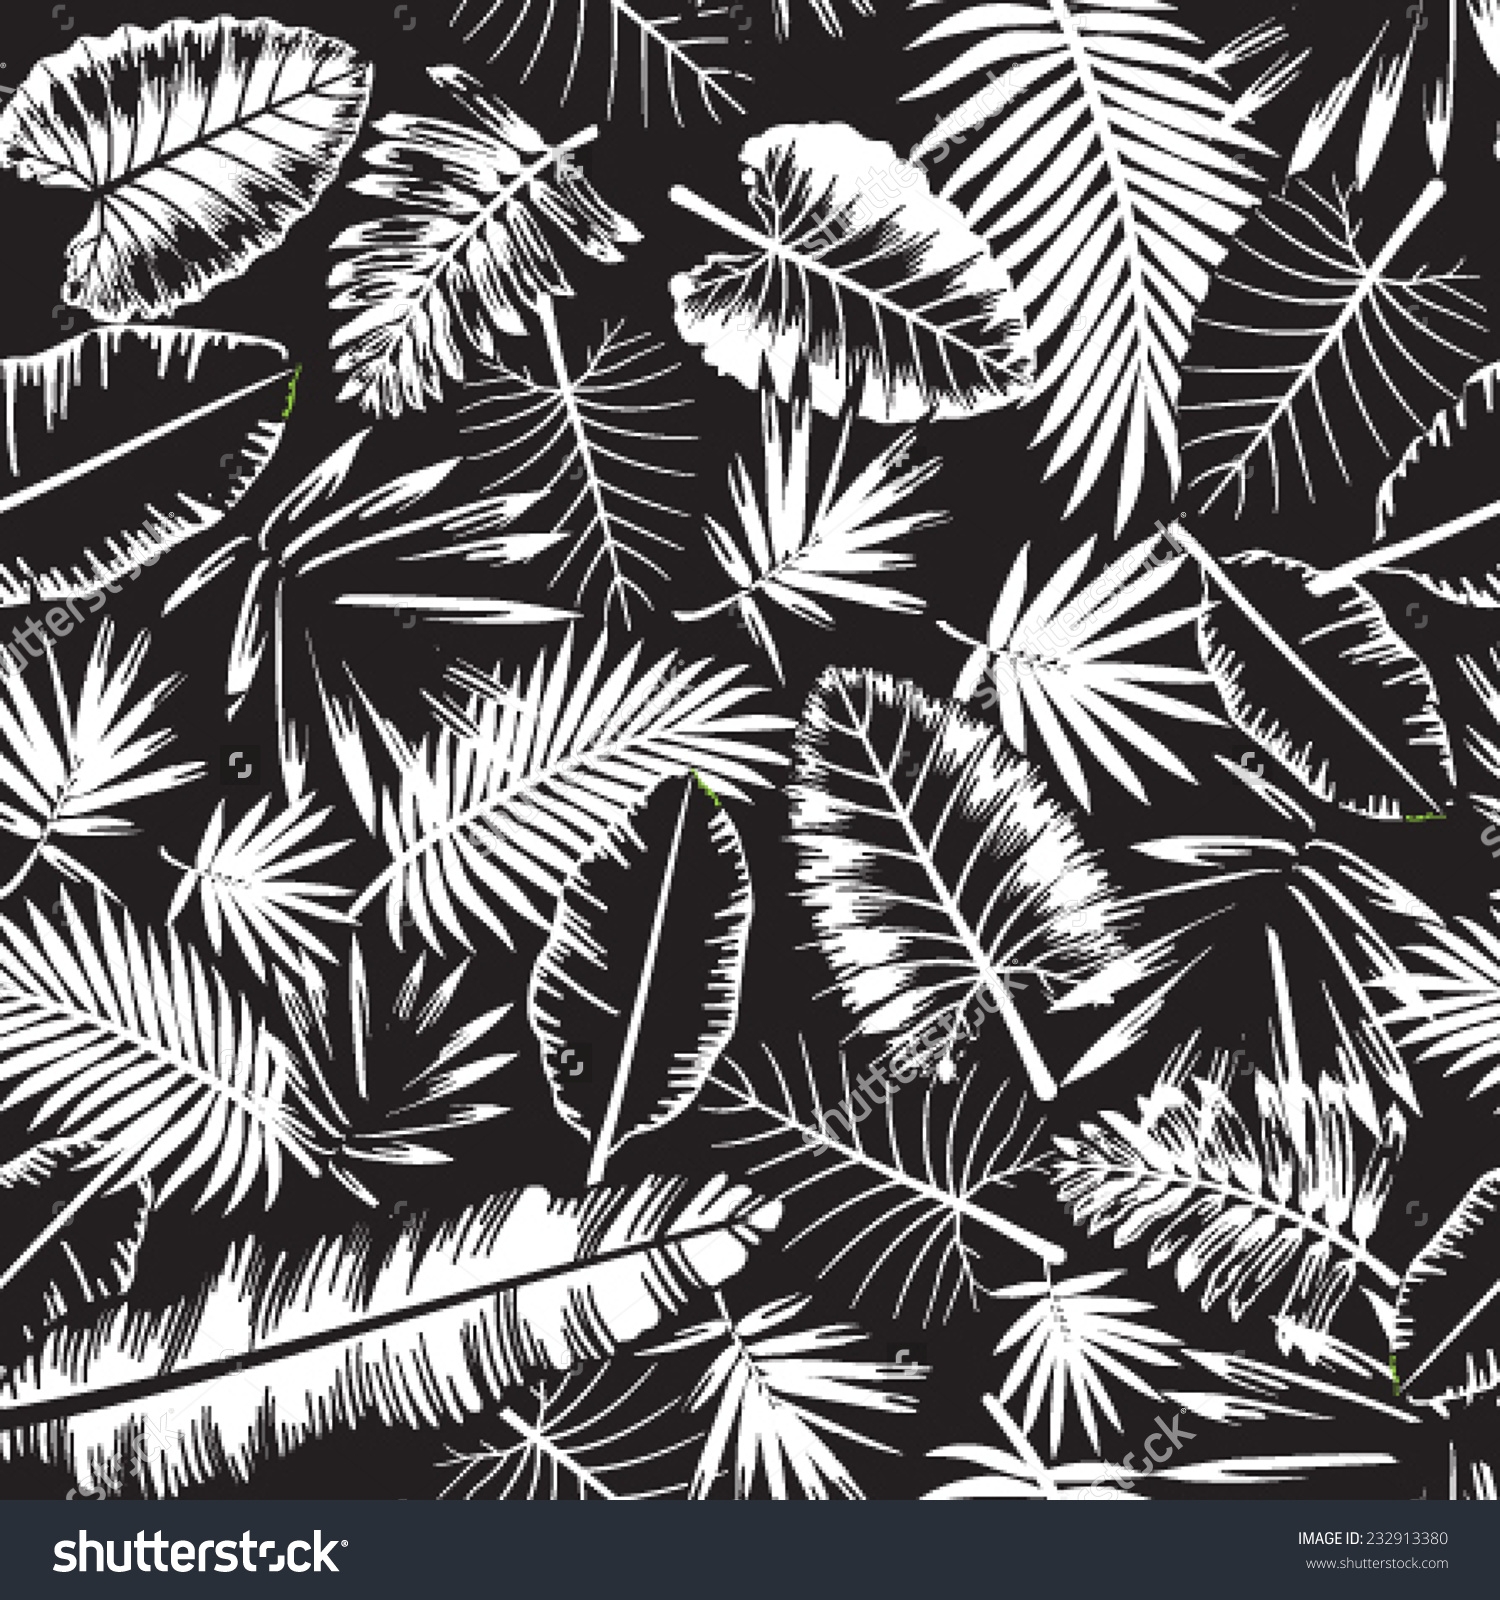 Jungle Background Clipart Black And White.